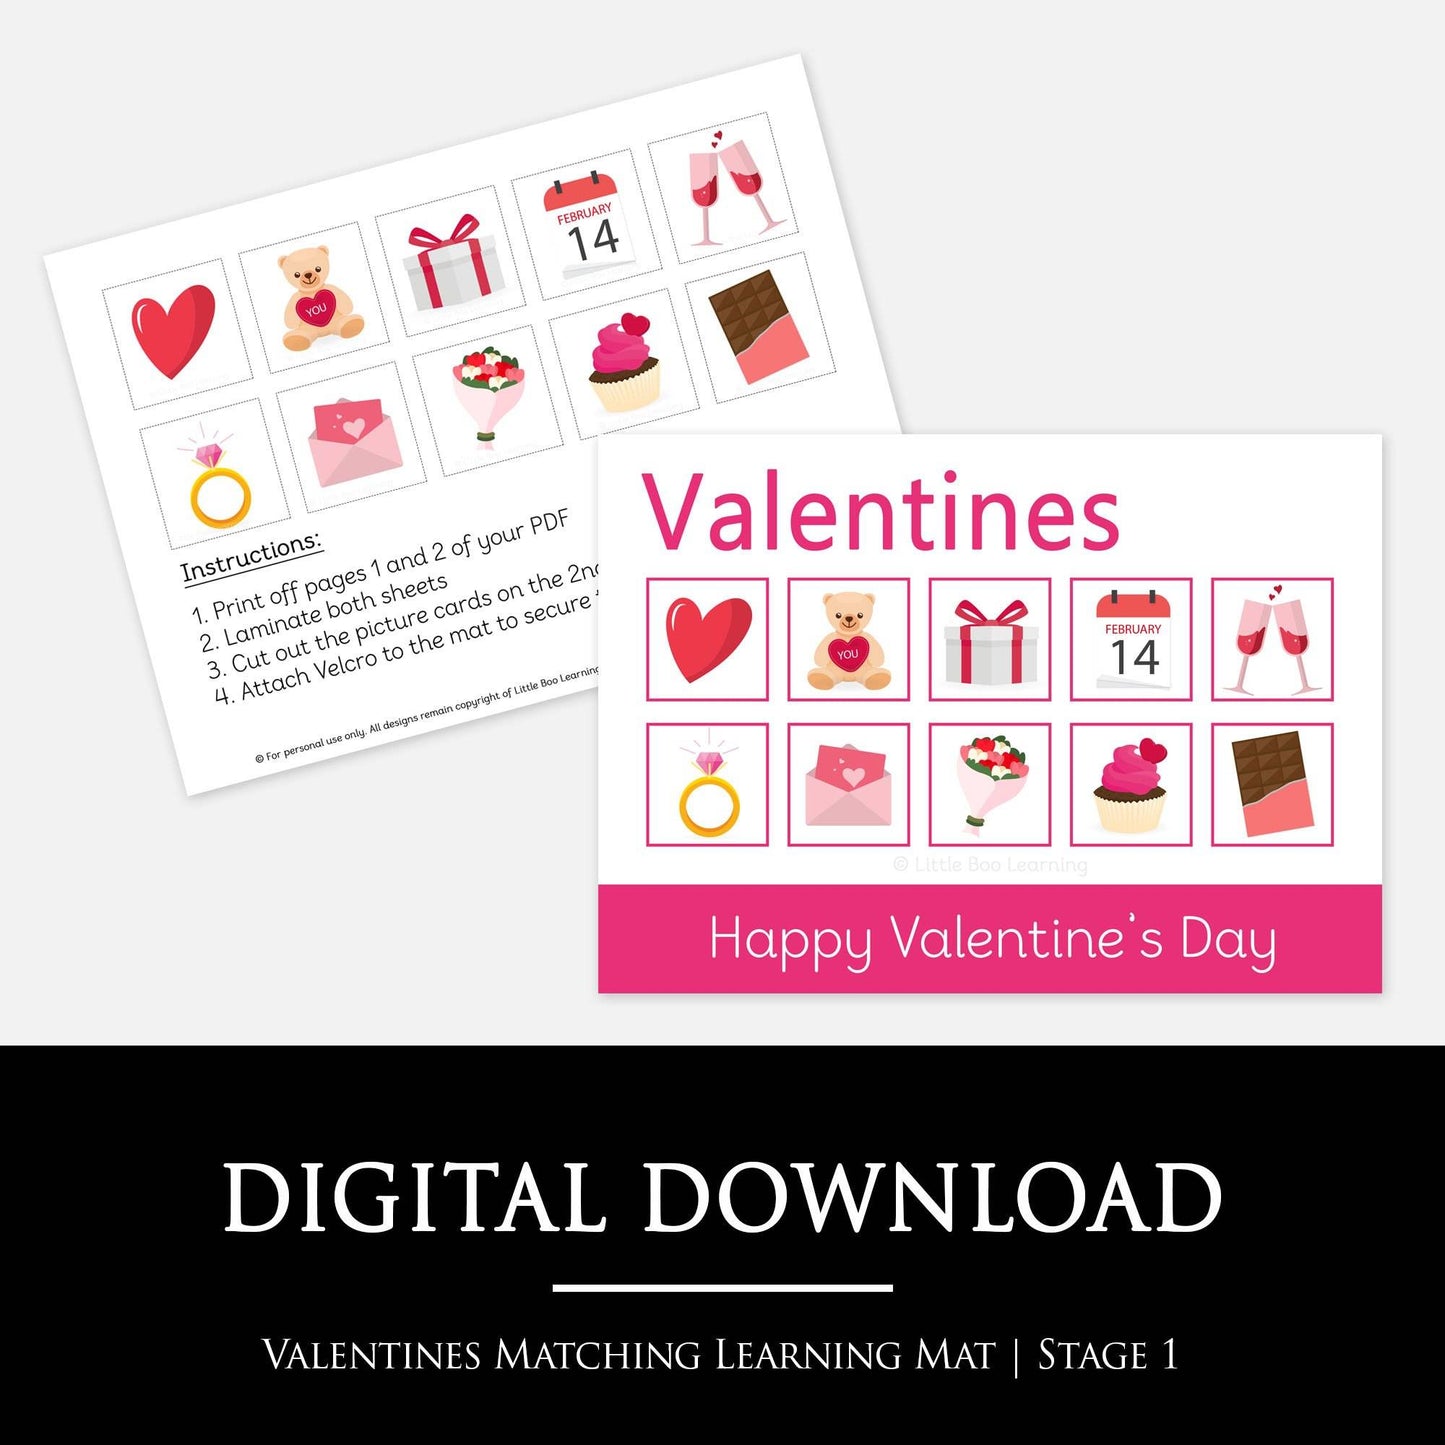 Valentines Matching Learning Mat - STAGE 1 | Digital Download-Little Boo Learning-Valentines